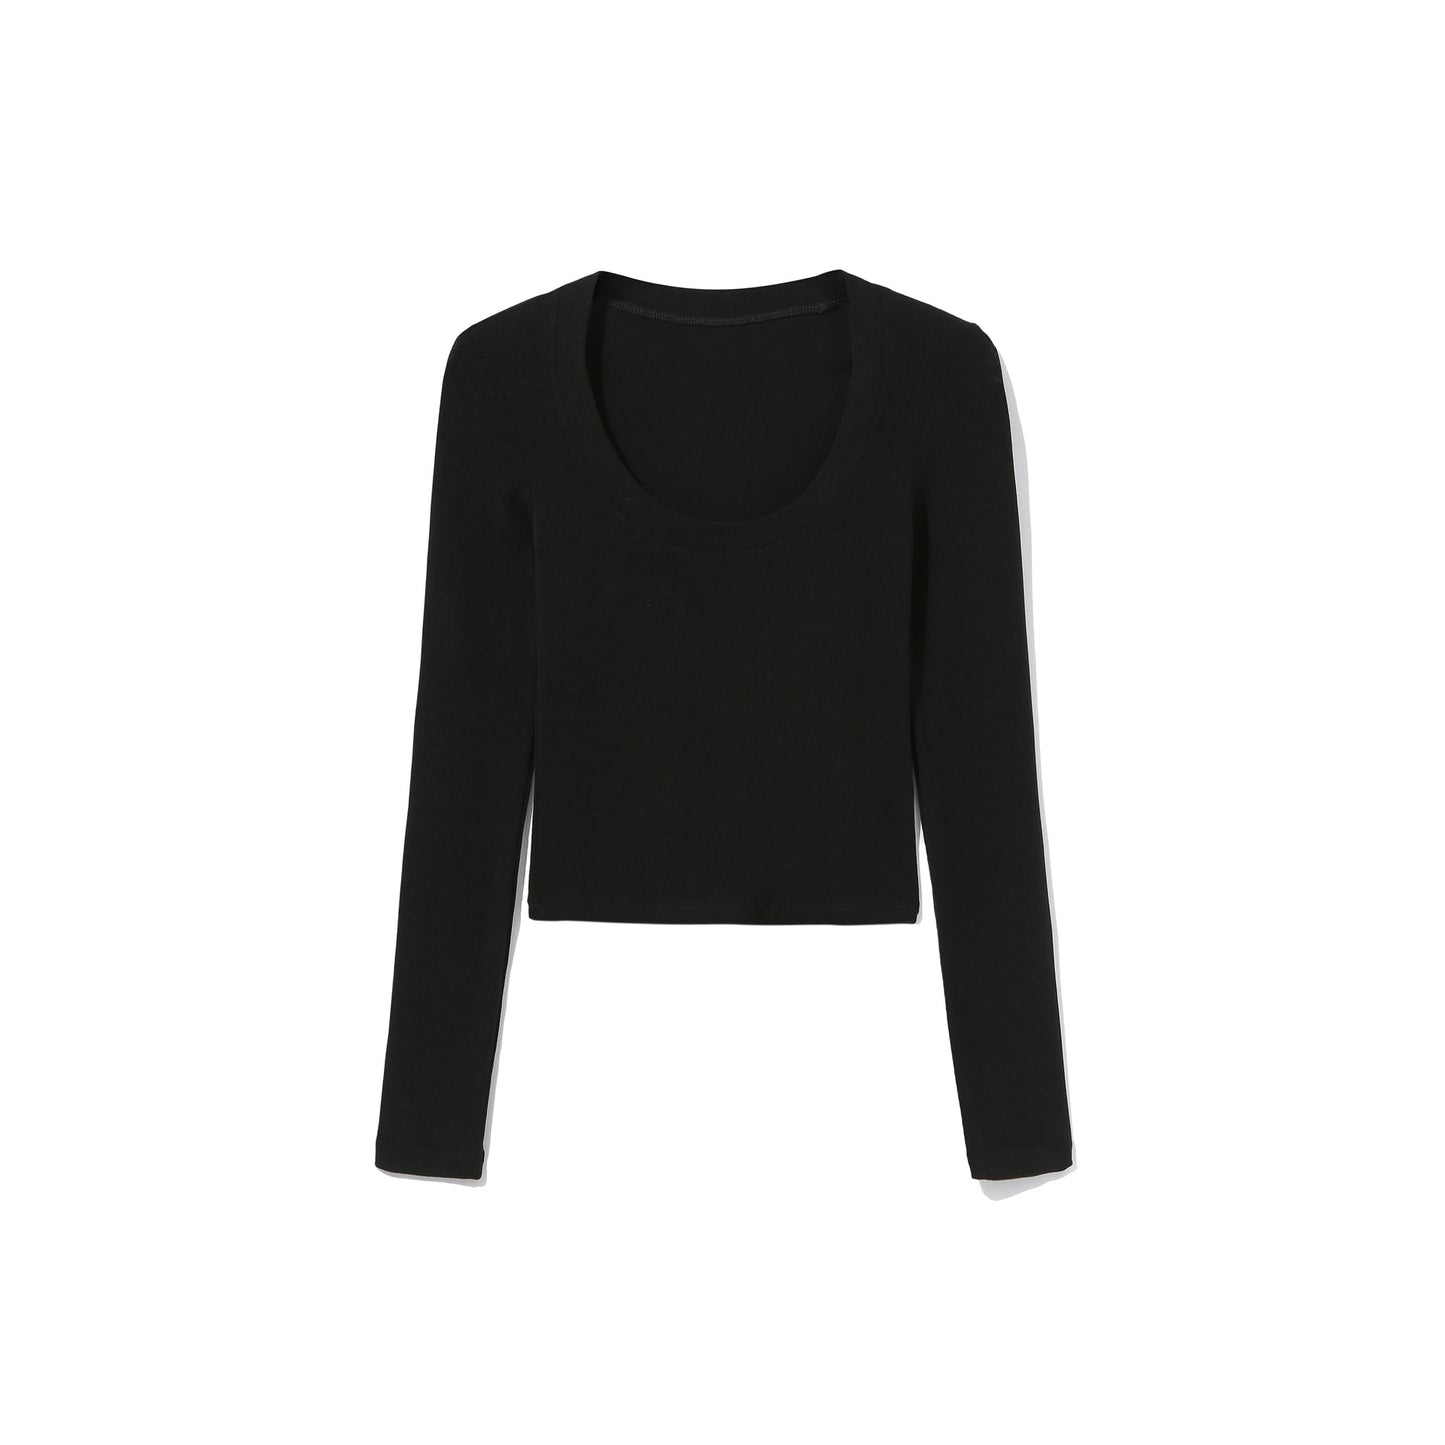 Minimalist Style Outfits |   Cotton Aesthetic Long Sleeve Crop Top